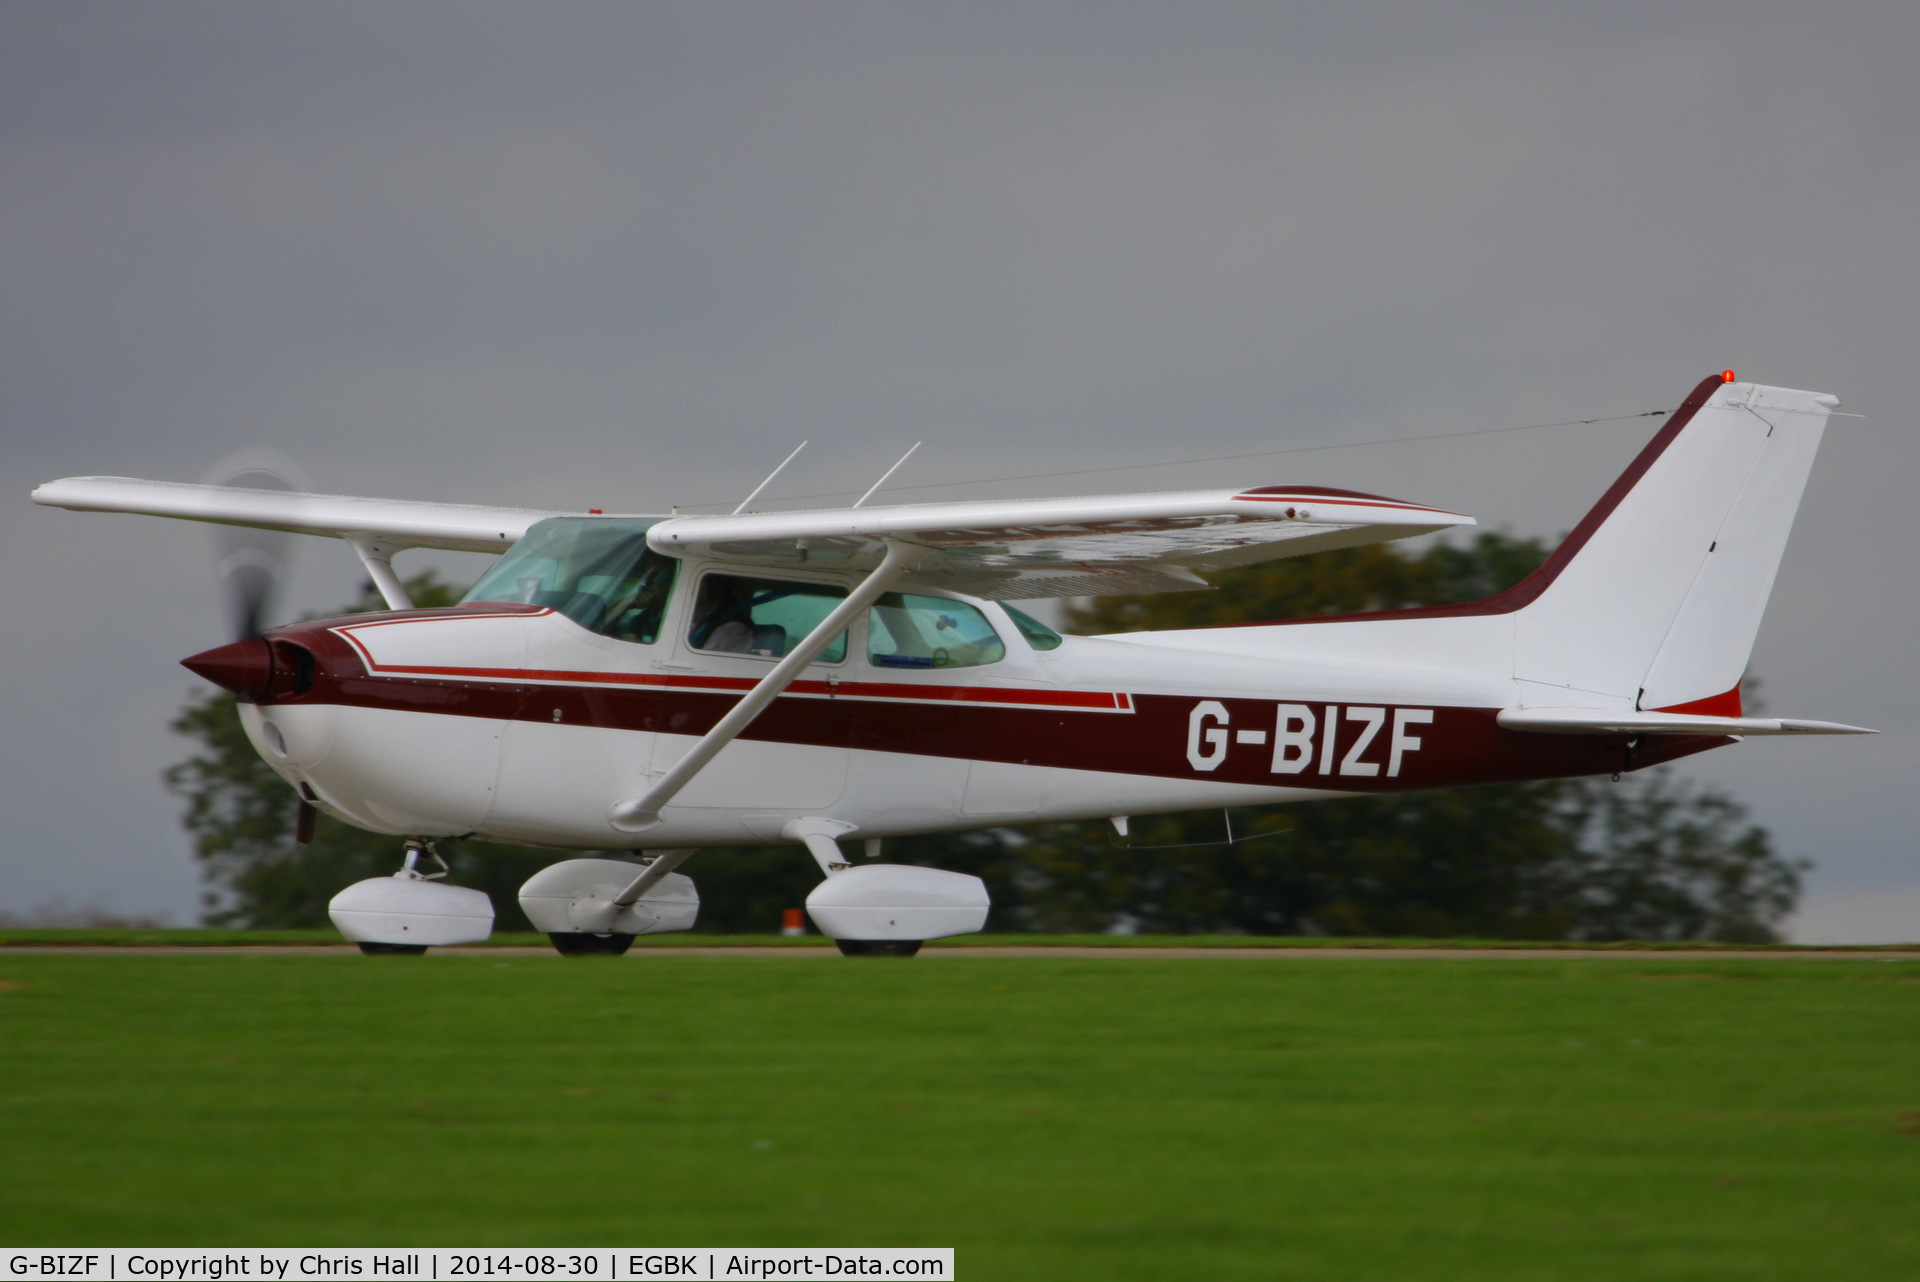 G-BIZF, 1981 Reims F172P Skyhawk C/N 2070, at the LAA Rally 2014, Sywell